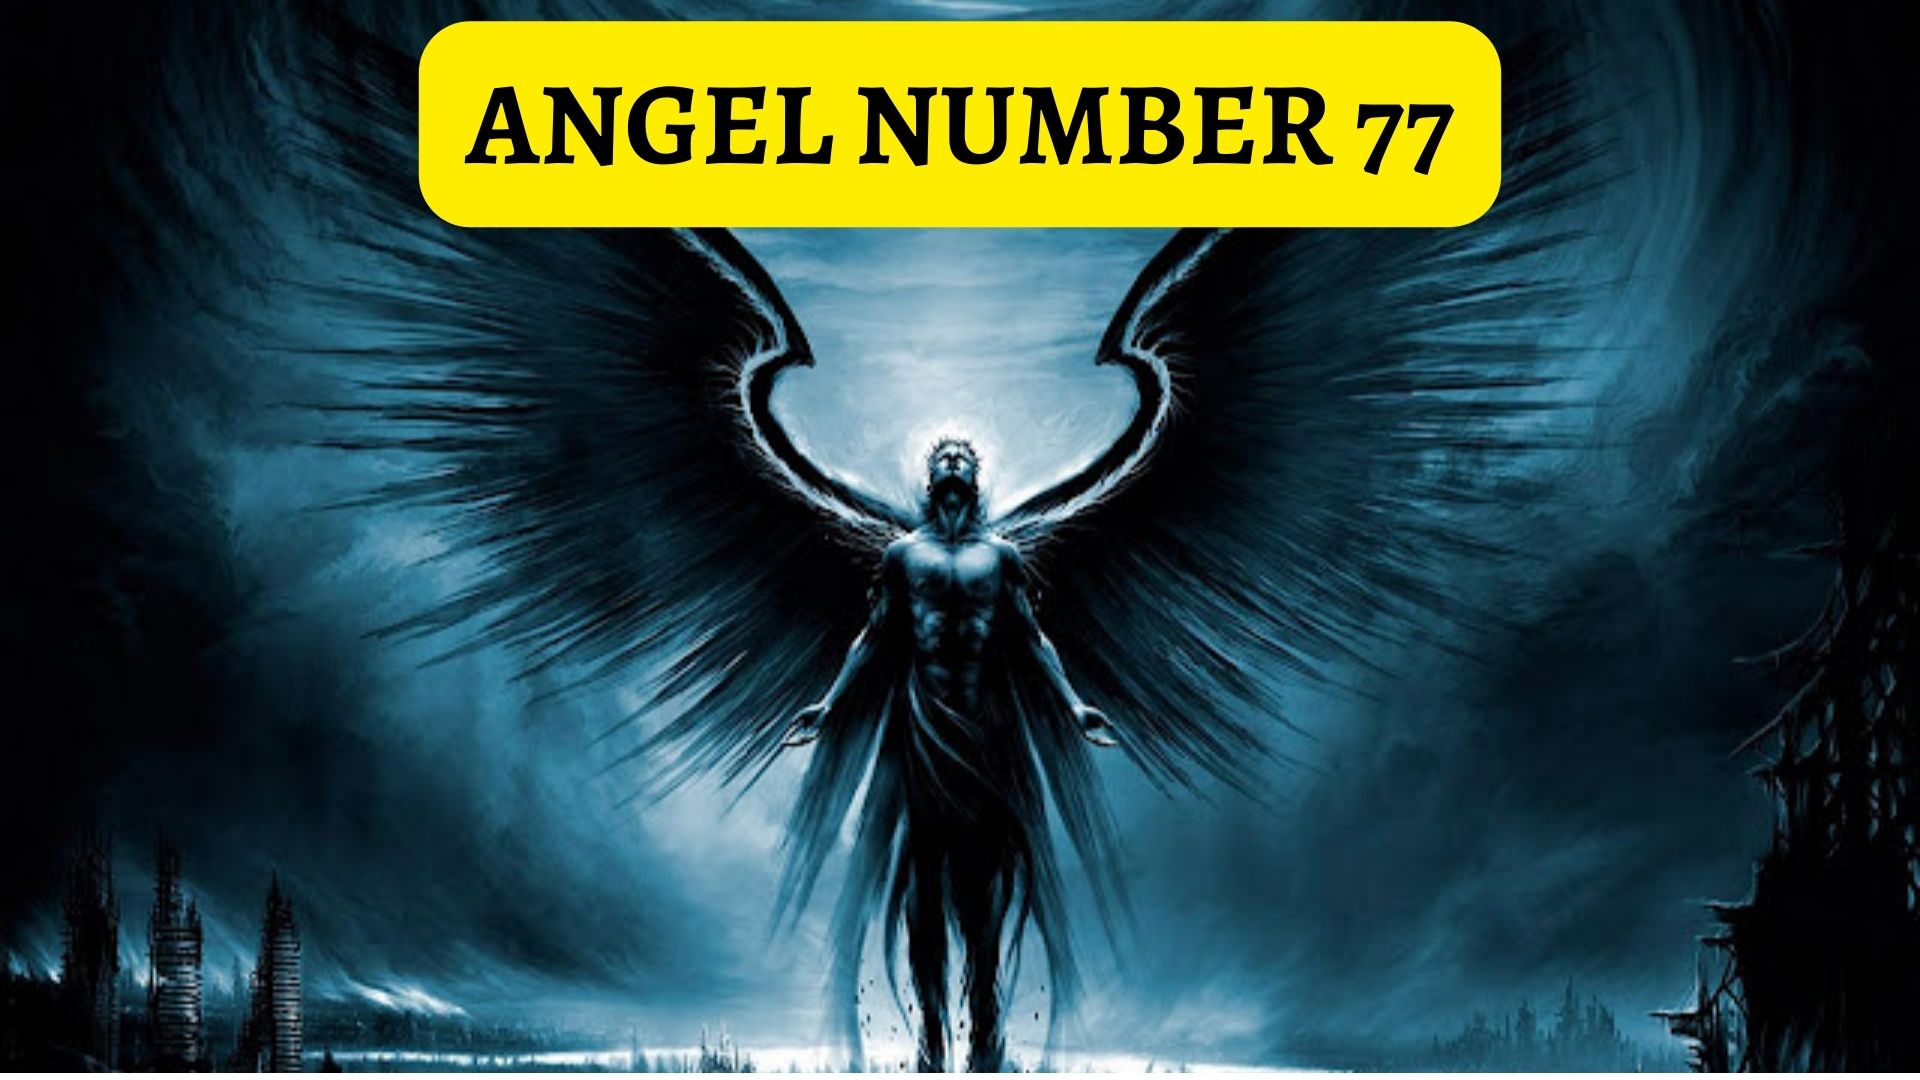 Angel Number 77 - A Symbol Of Prosperity, Harmony, And Unity